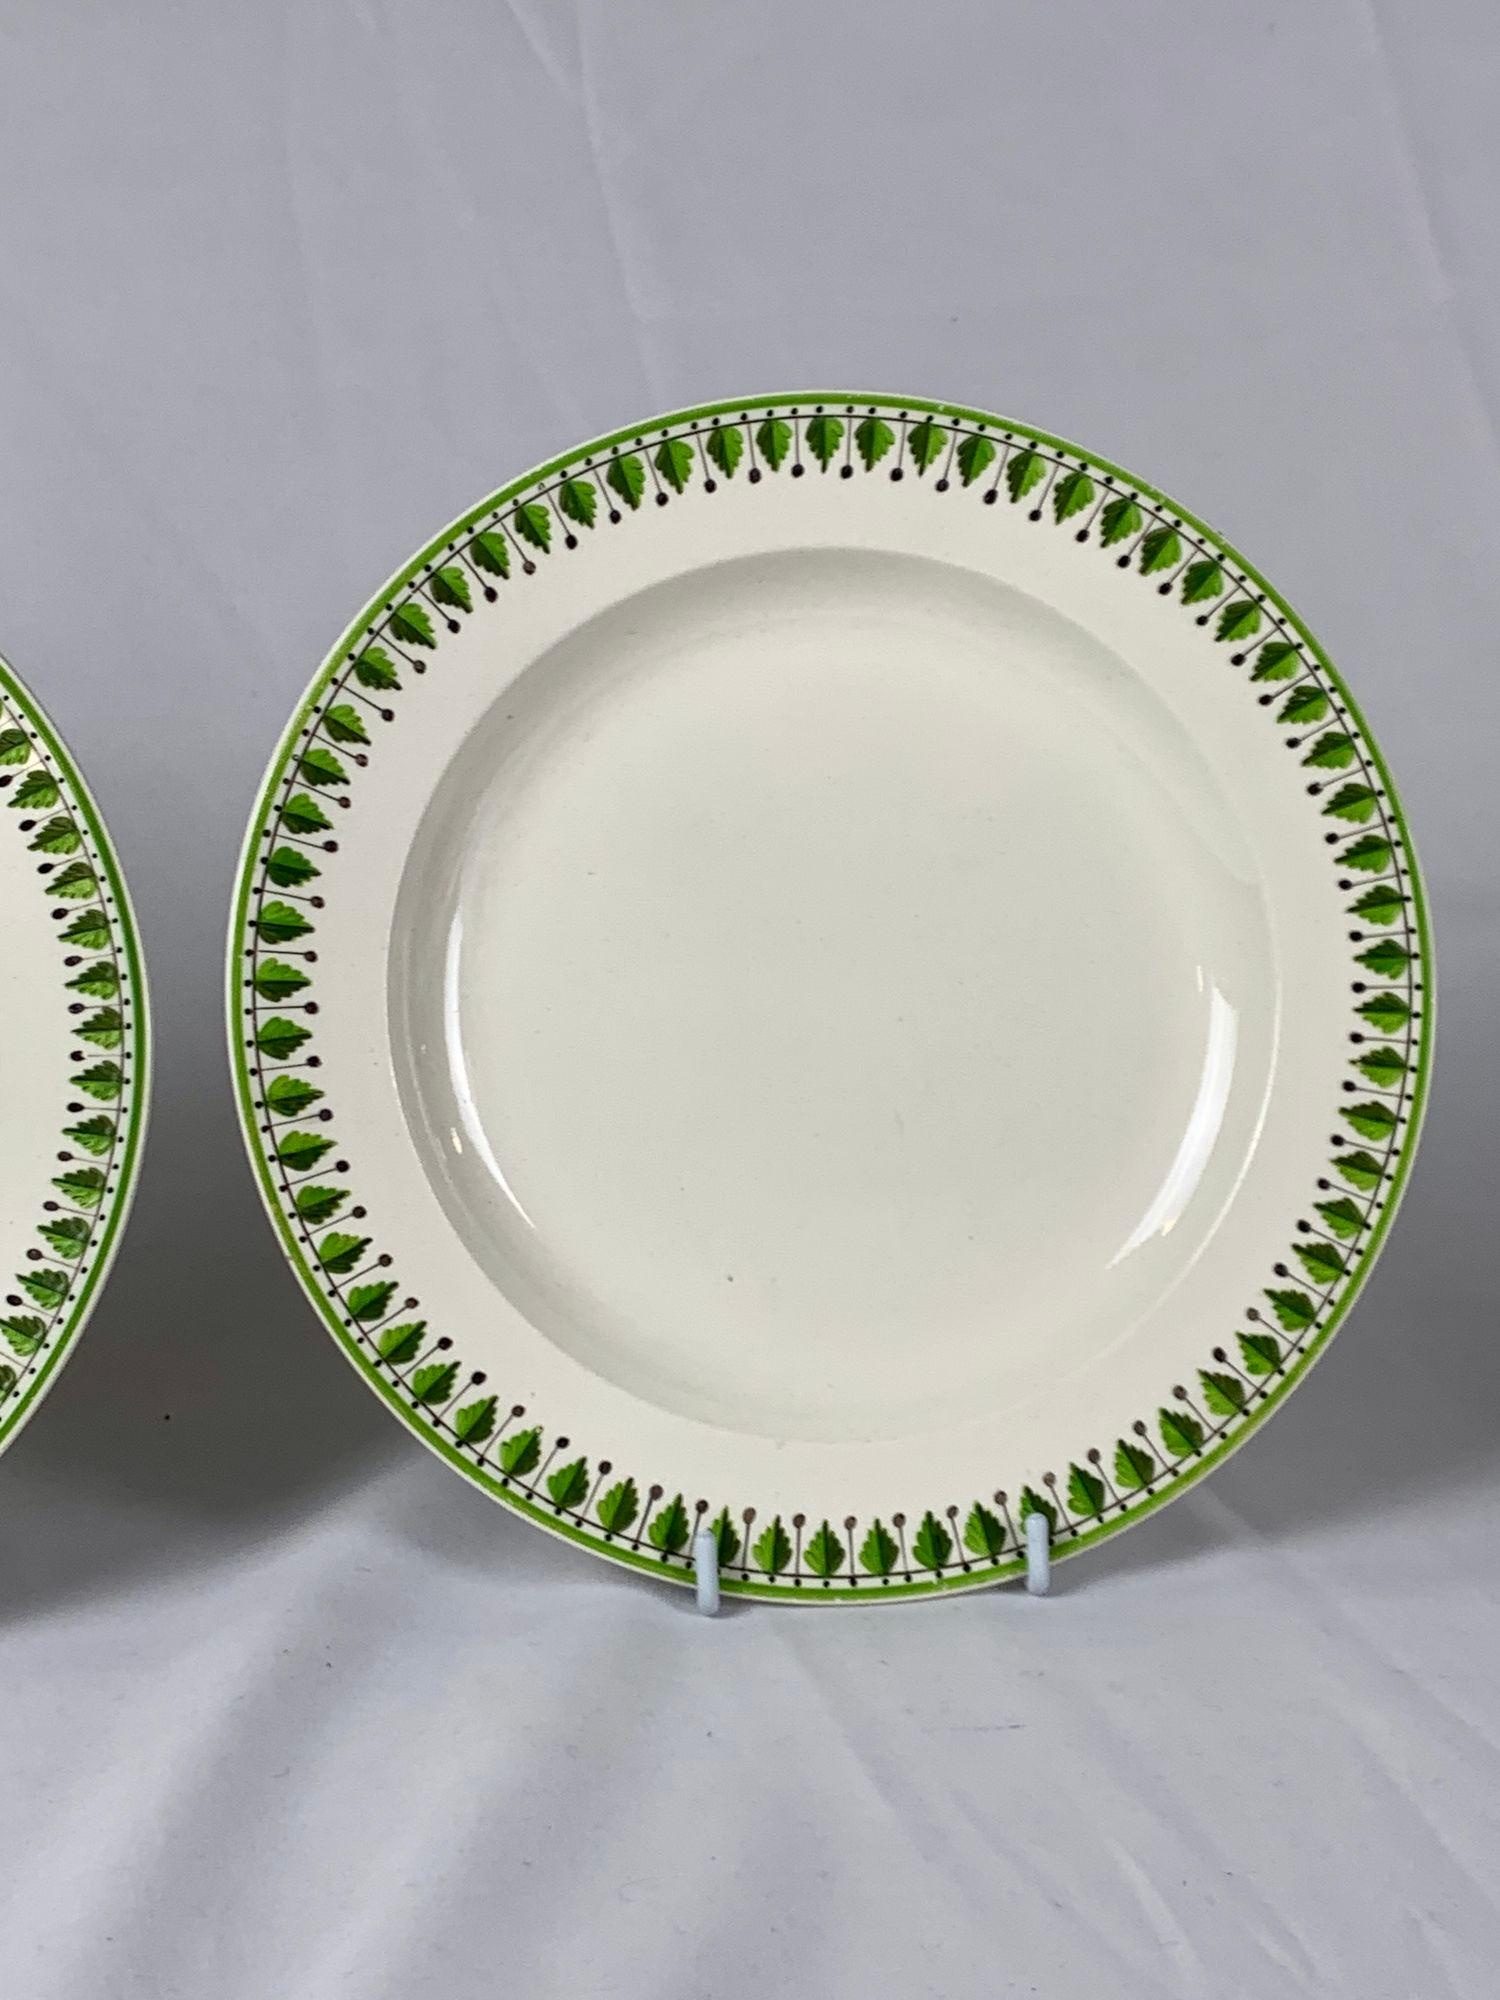 English Pair Wedgwood Creamware Dishes Hand Painted England Circa 1810 For Sale